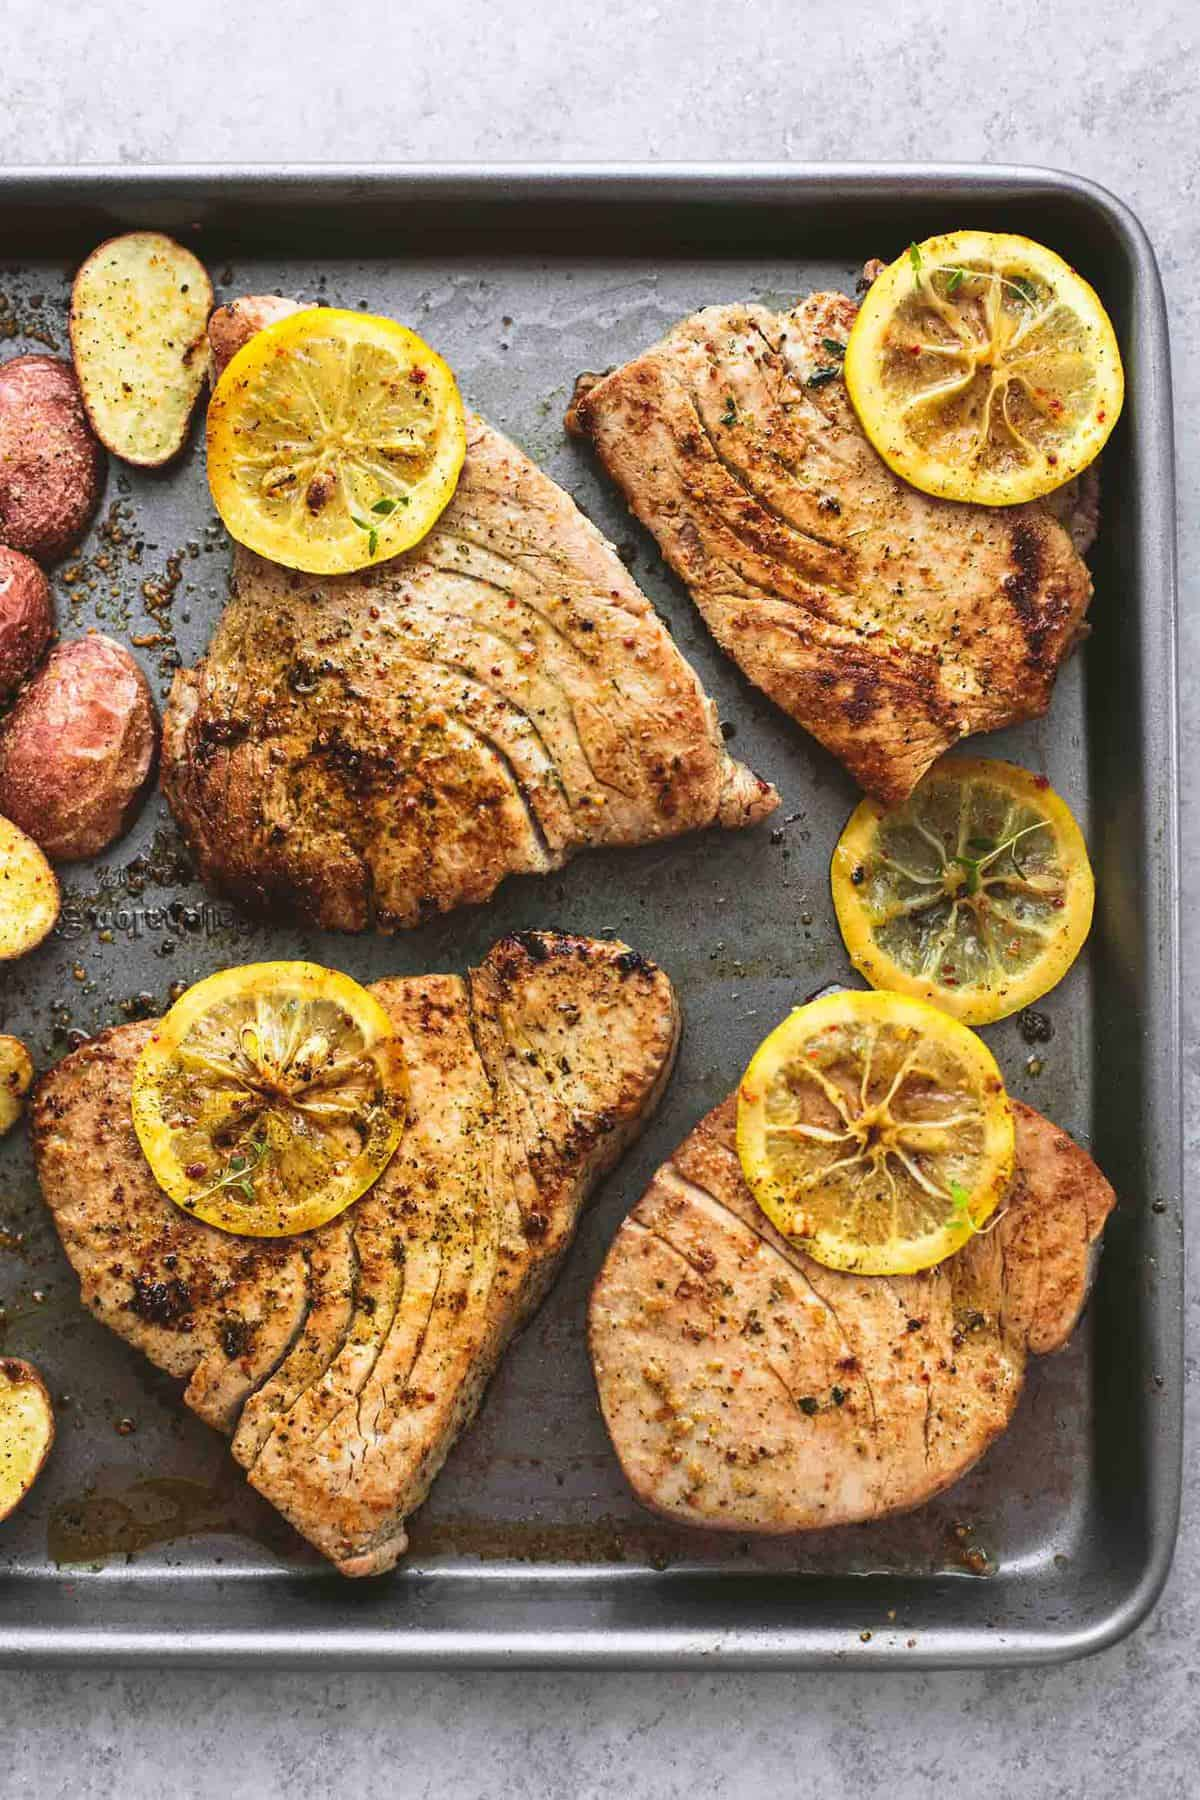 Tuna fillets on a sheet pan, baked with lemons and potatoes